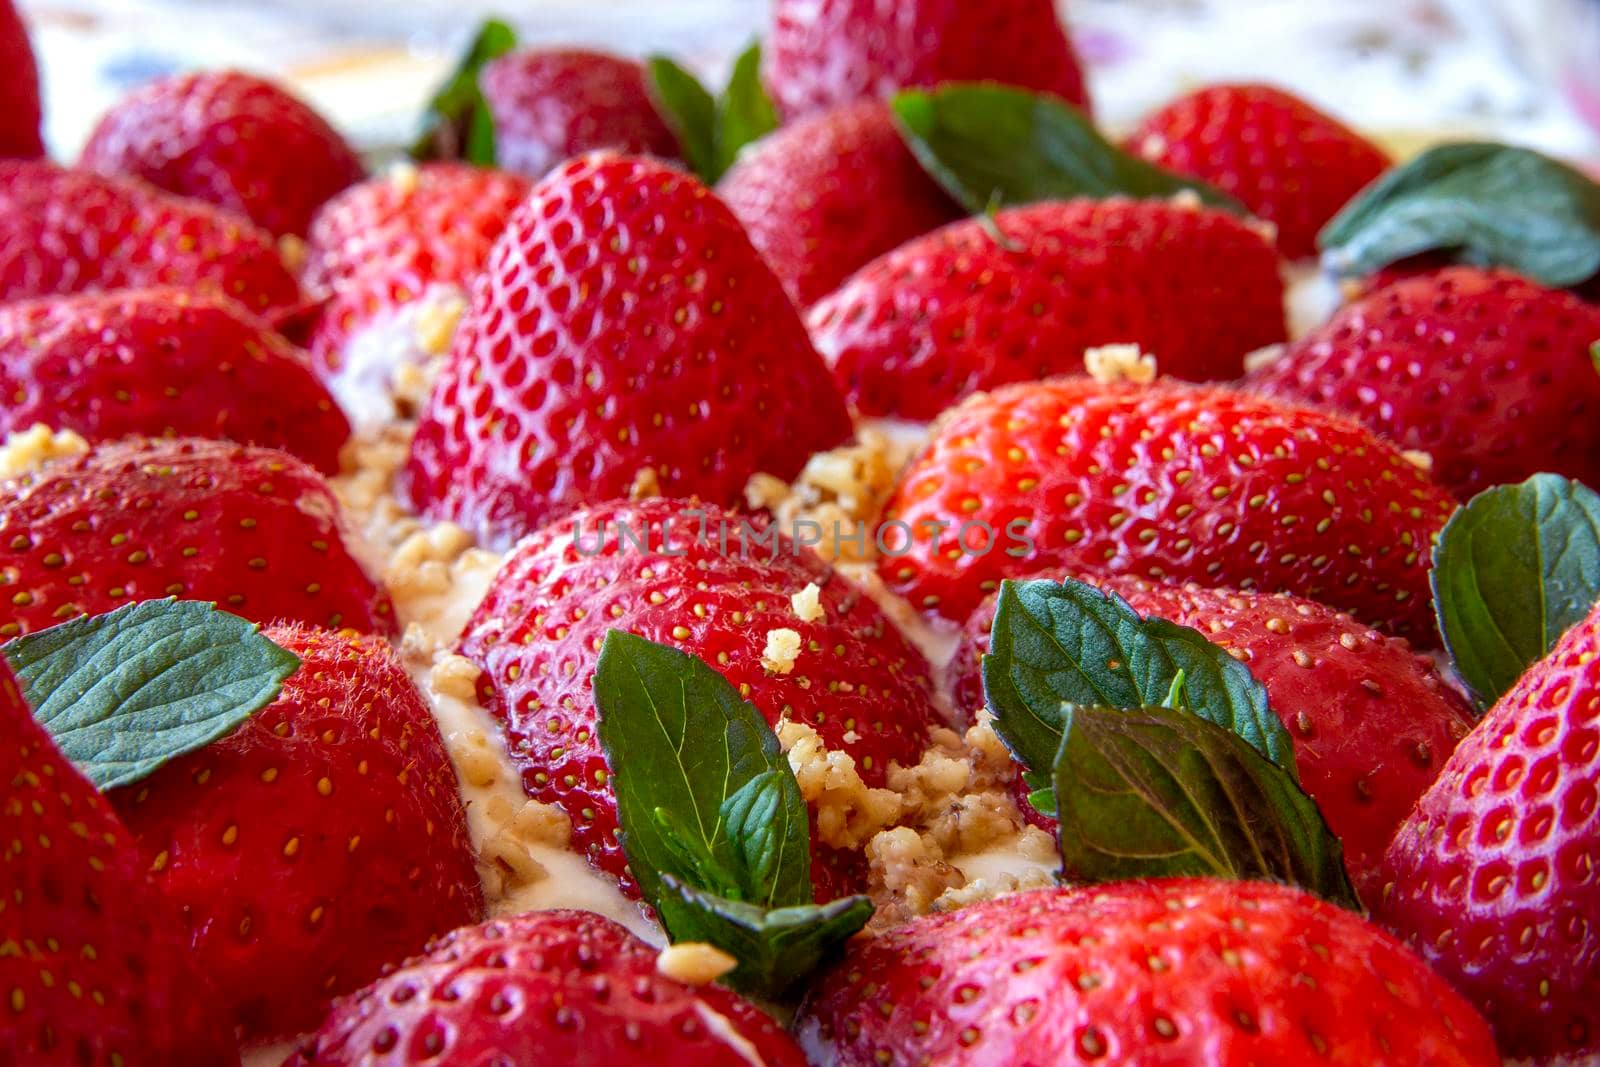 Concept of tasty food with strawberry tart, close-up view.